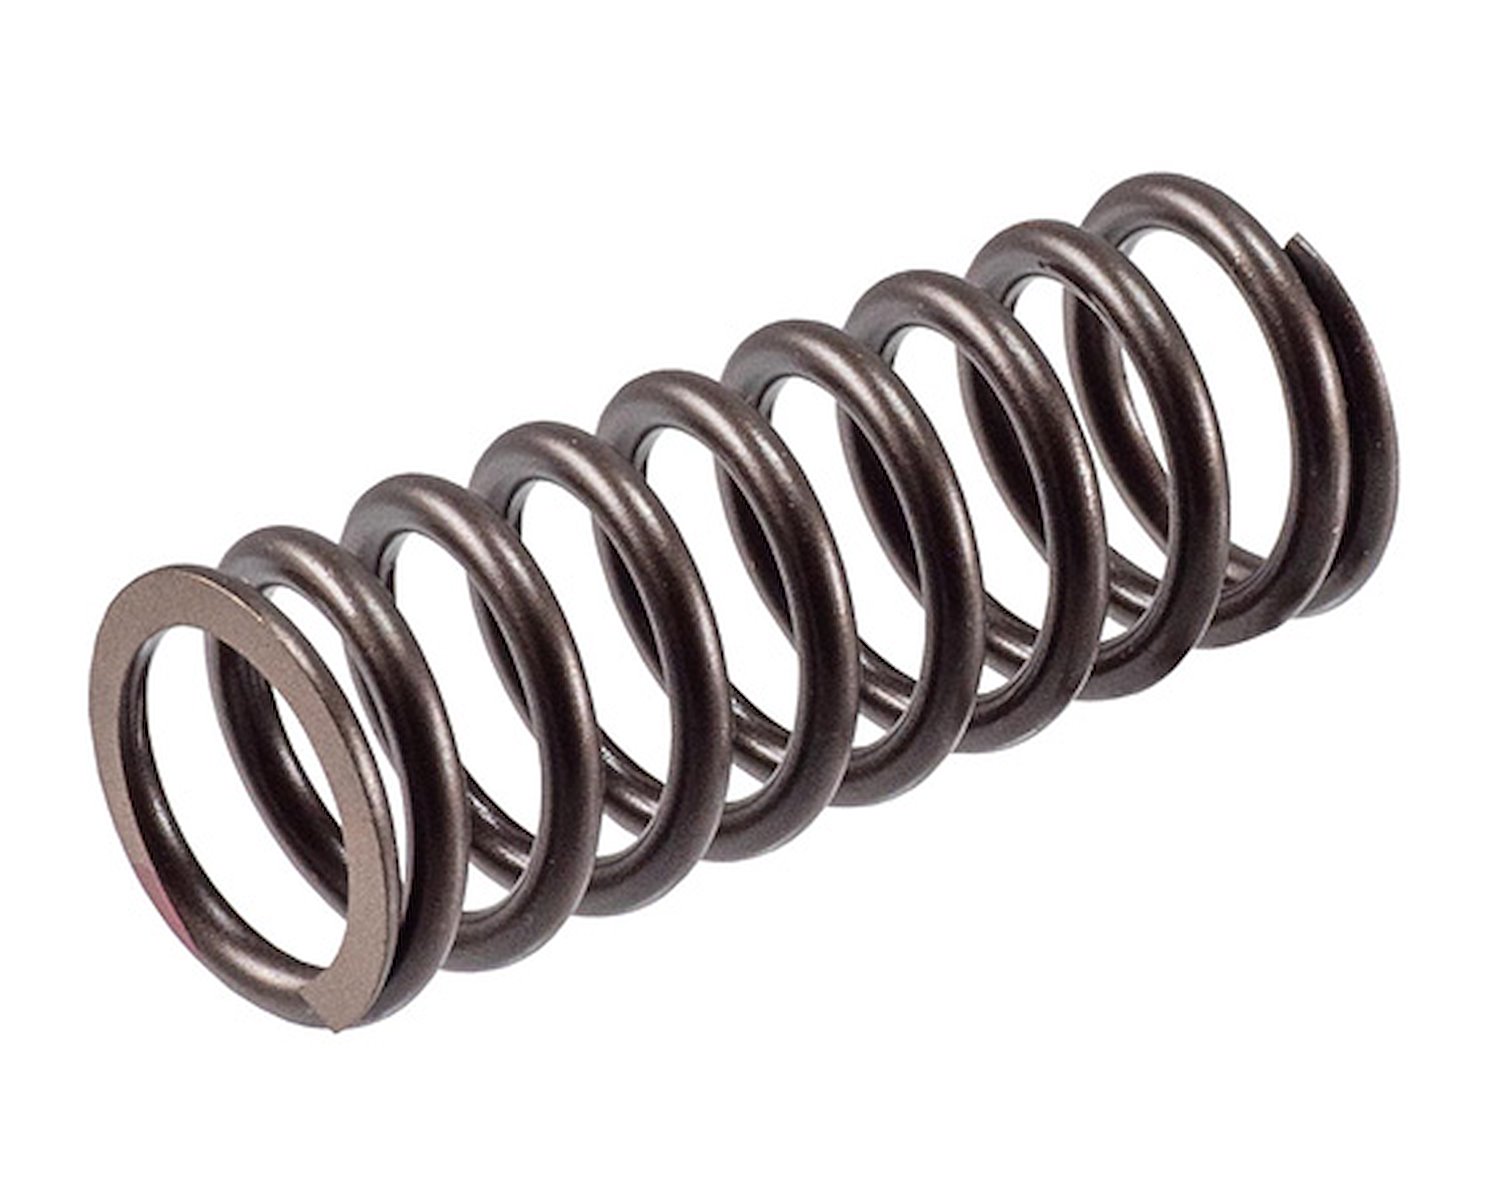 Valve Spring for Select Heavy-Duty/Industrial Application with